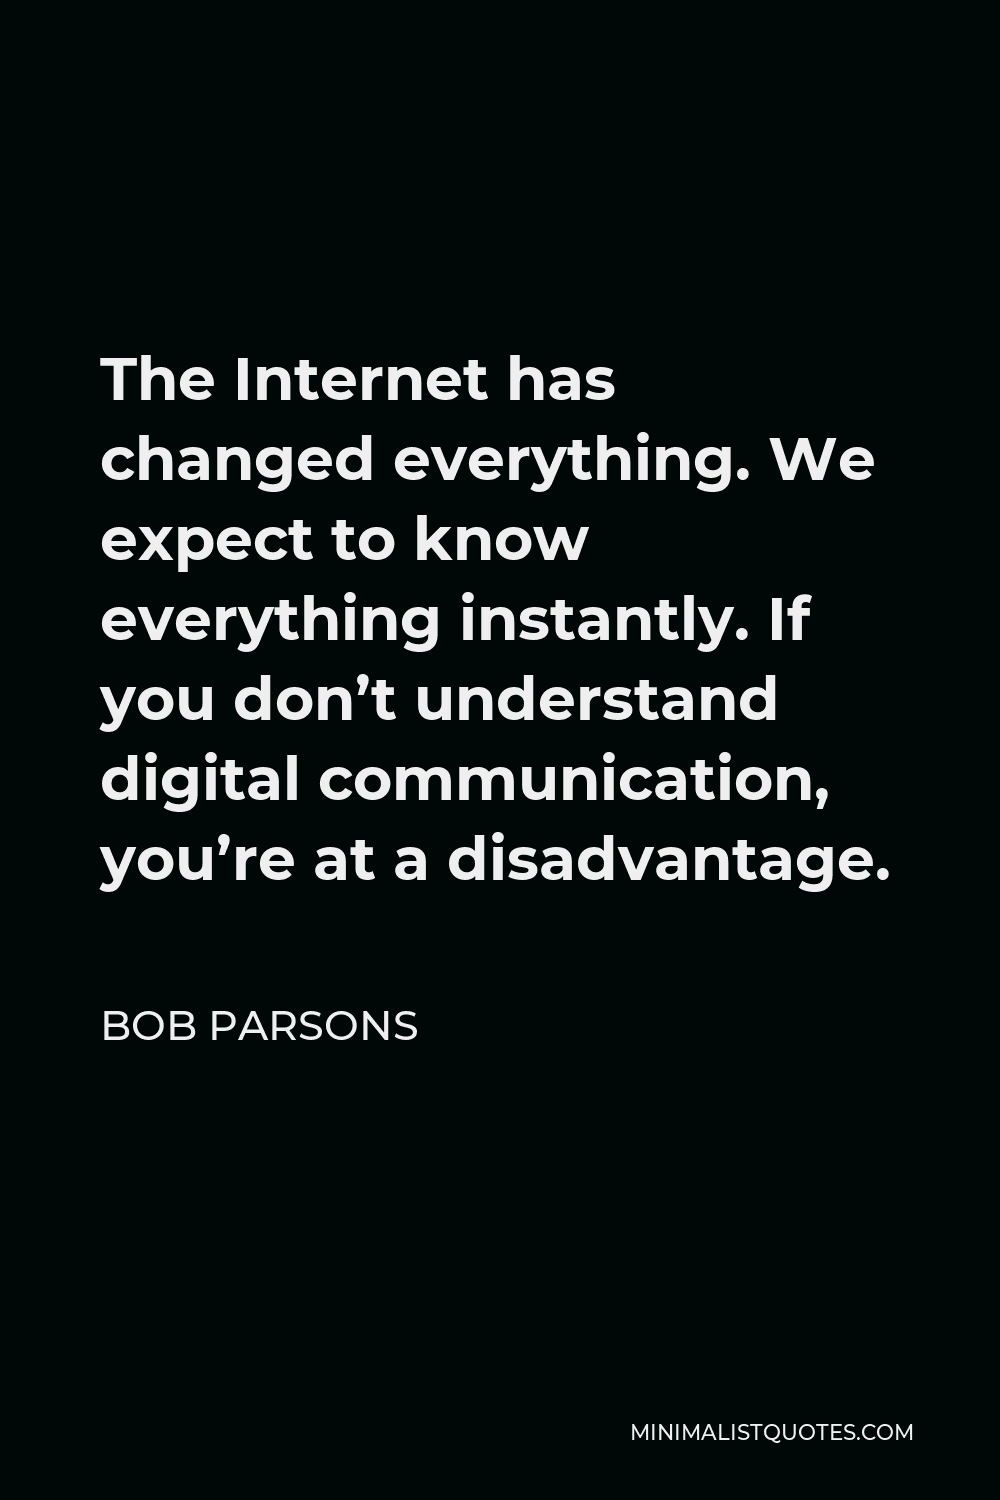 Bob Parsons Quote - The Internet has changed everything. We expect to know everything instantly. If you don’t understand digital communication, you’re at a disadvantage.